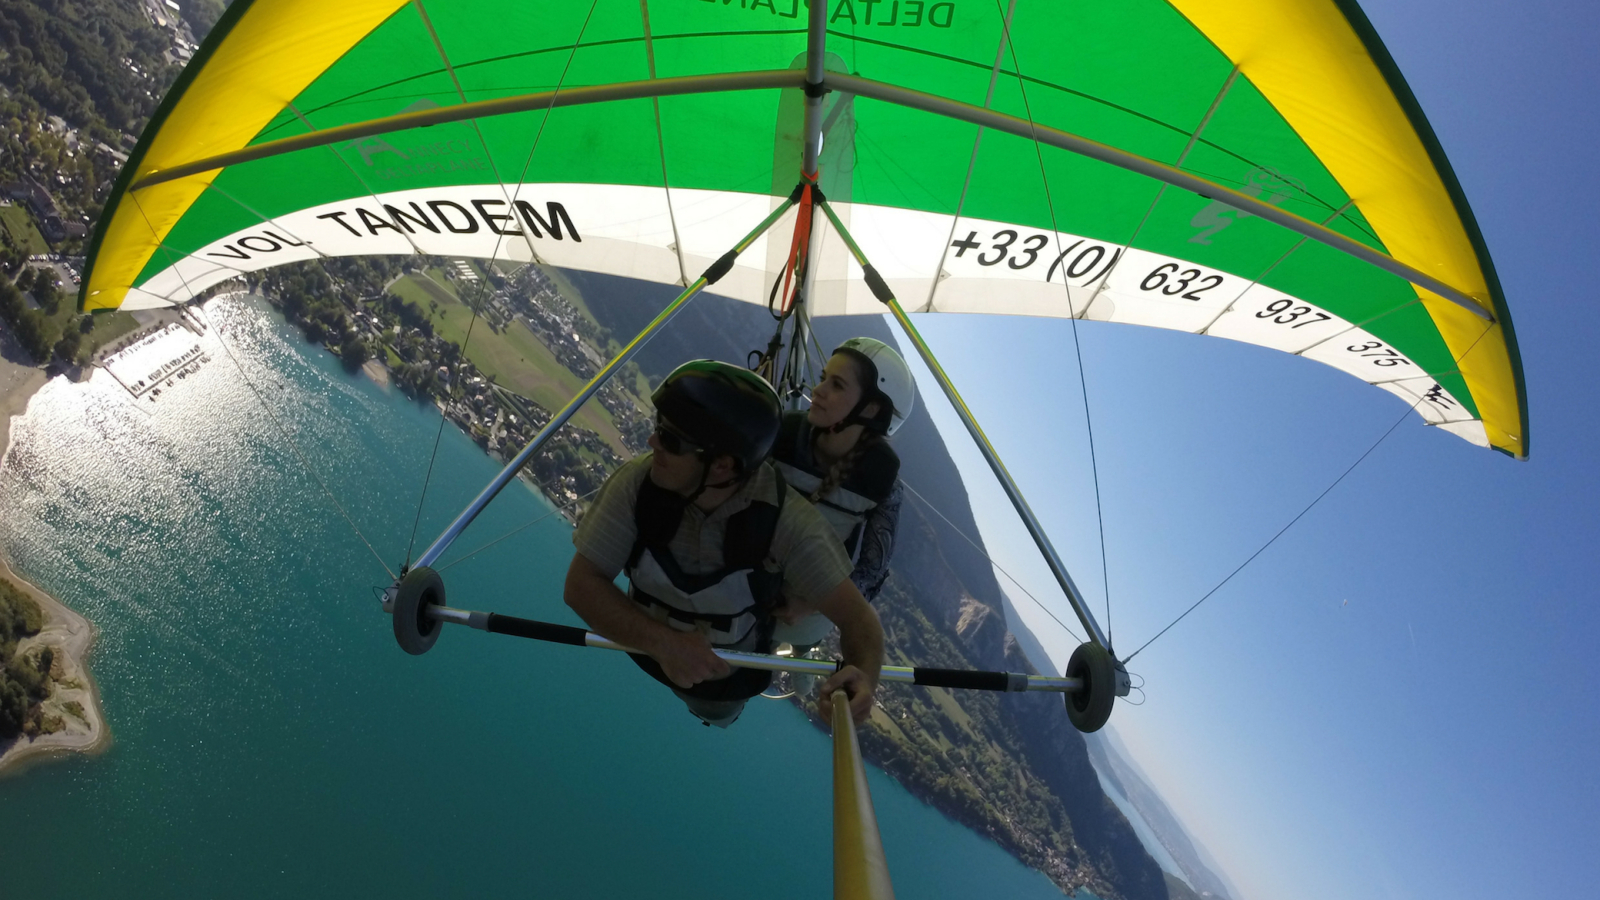 high performance hang gliding flight above lake Annecy